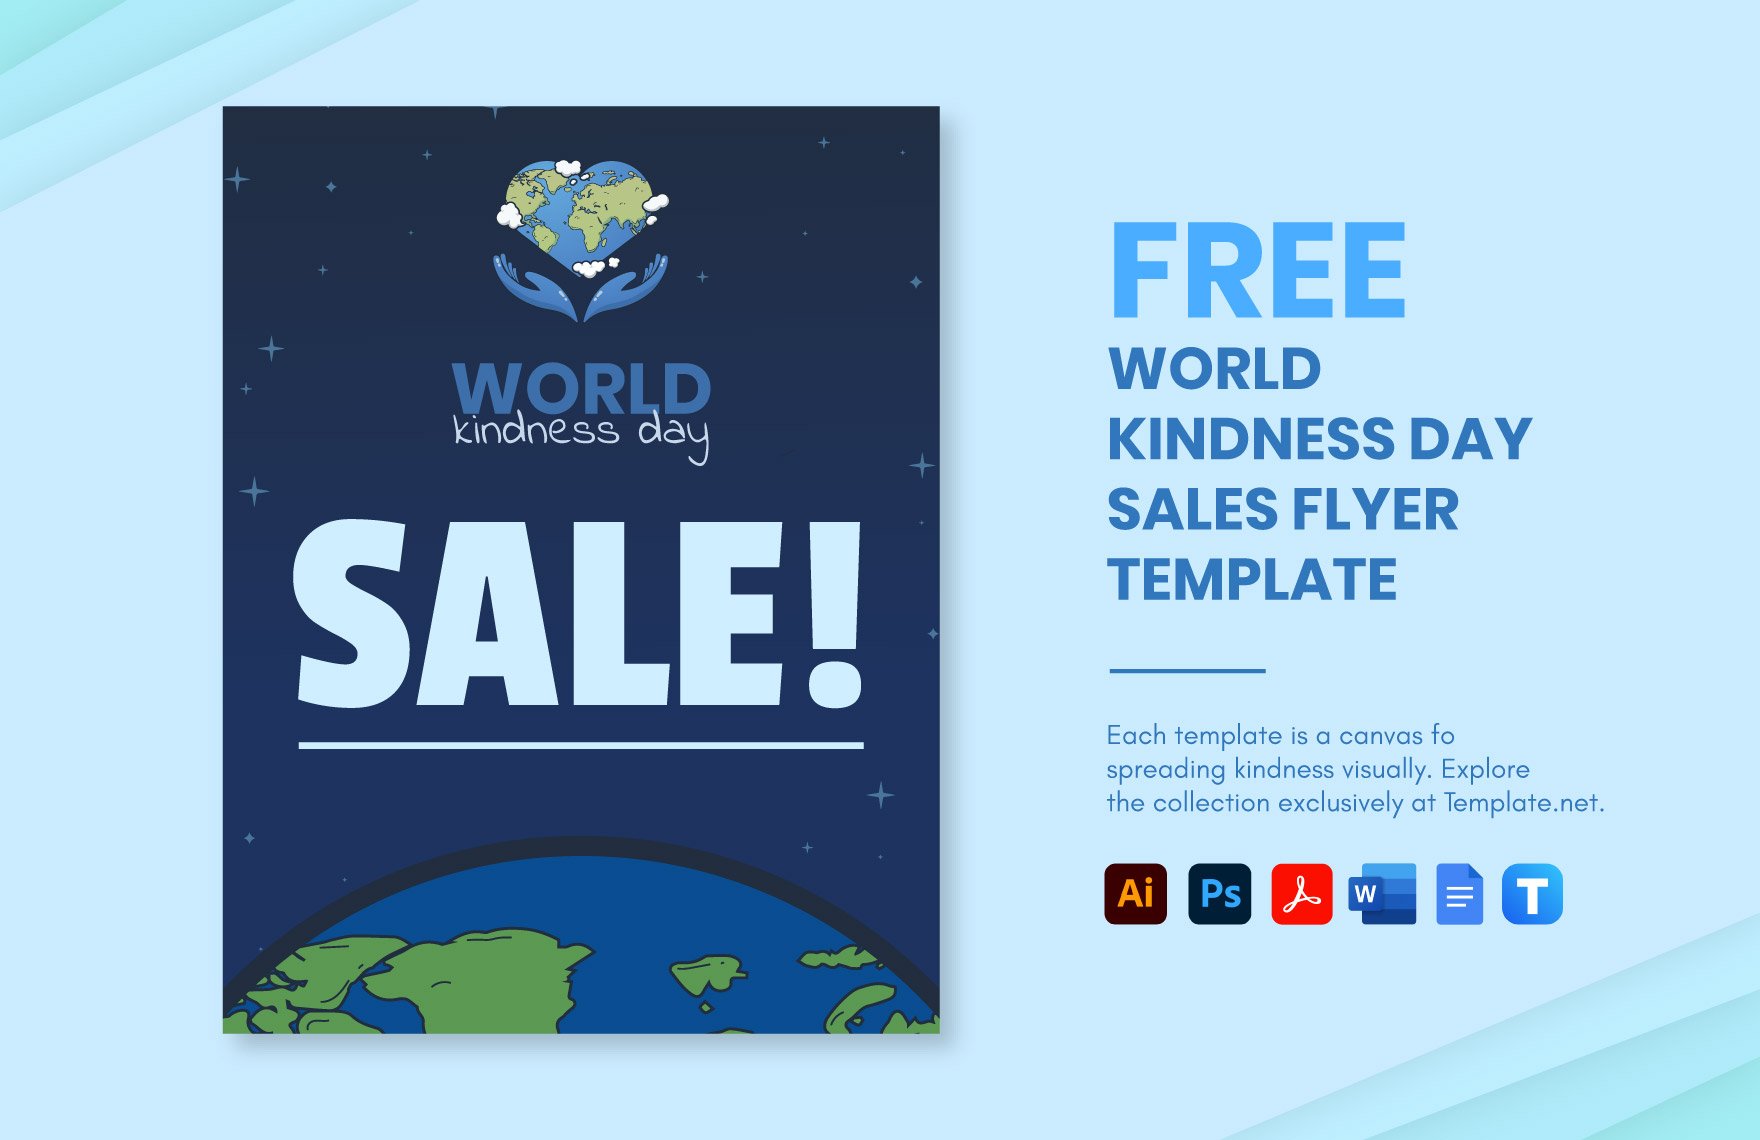 World Kindness Day Sales Flyer Template